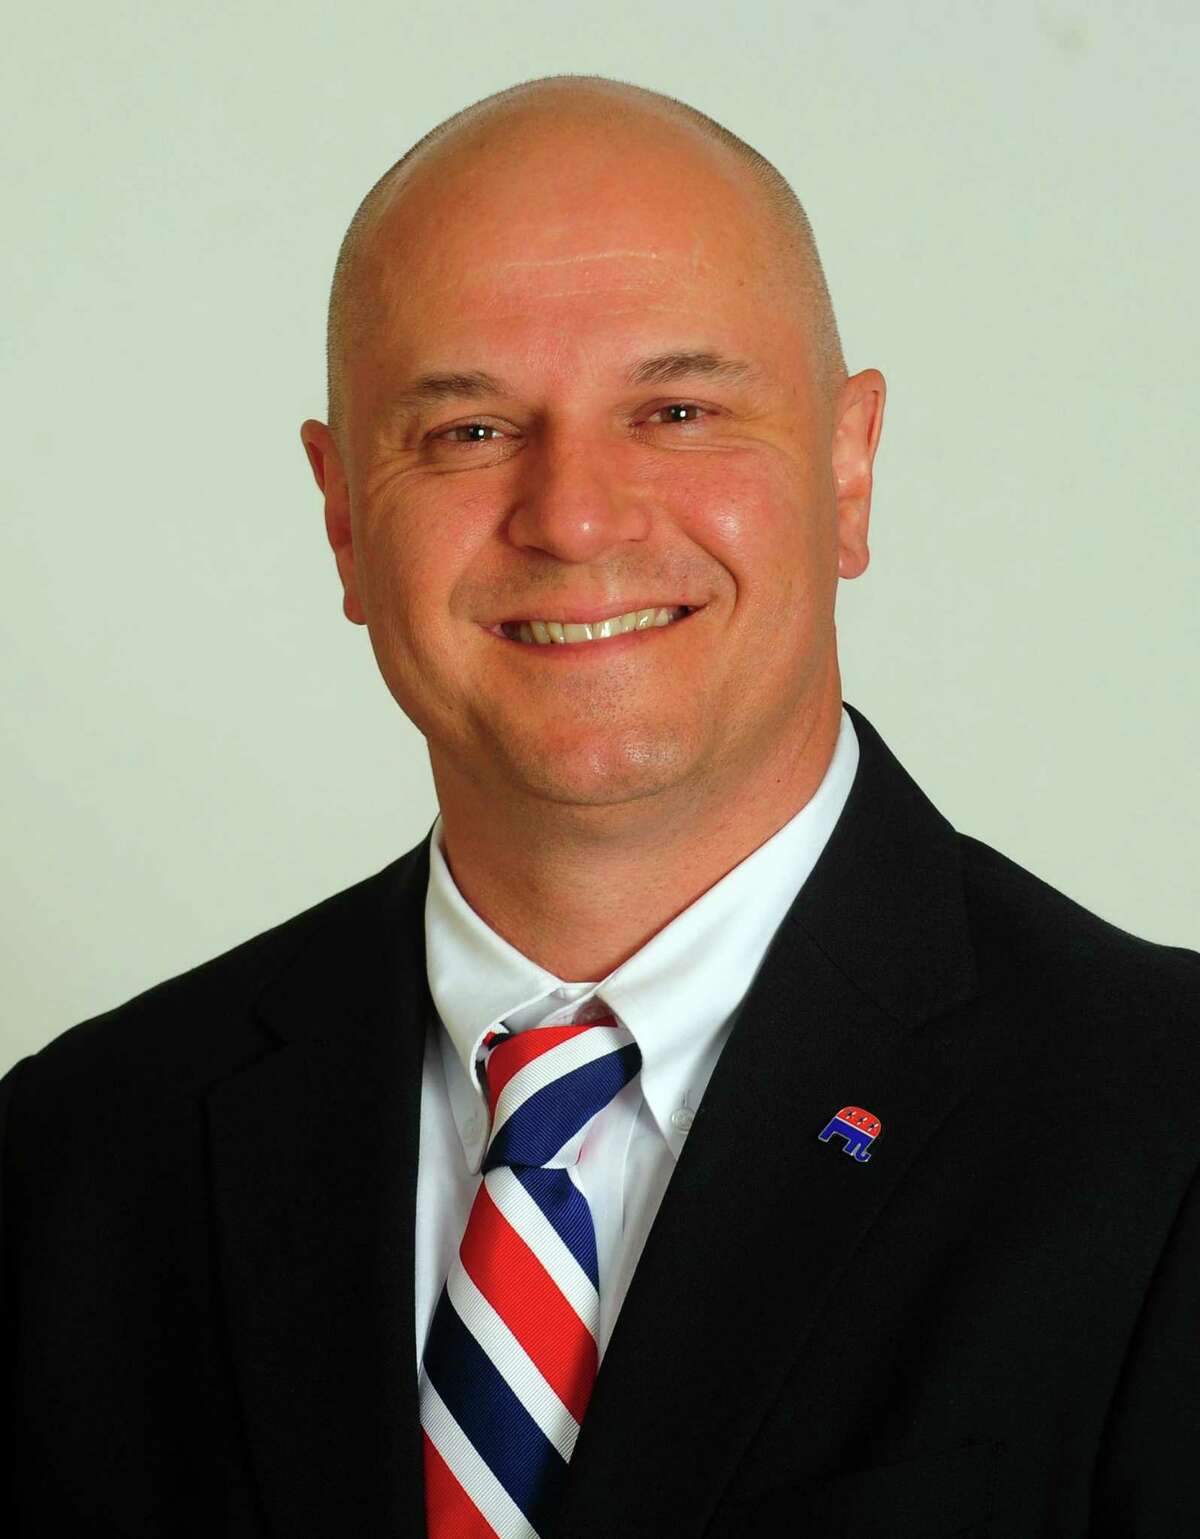 “As the chairman of the Stratford Republican Party, I am proud of the slate of candidates we put forward this evening,” said Lou Decilio of the Republican Town Committee’s endorsements for the November 2019 election.